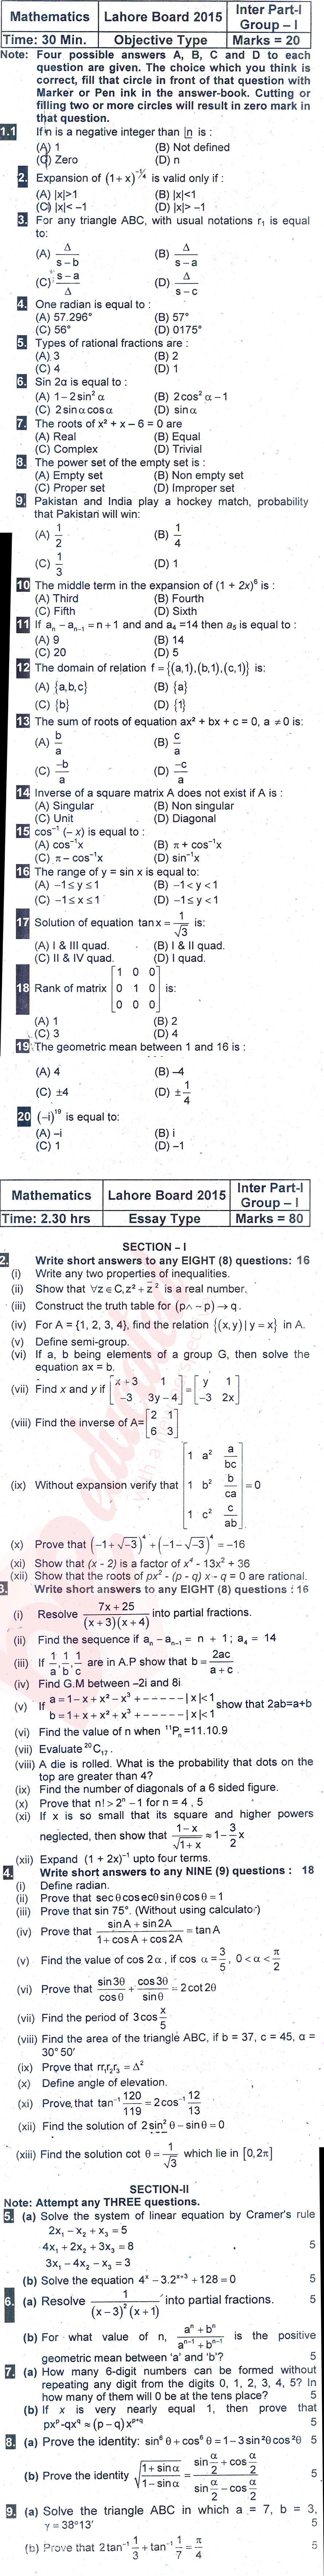 Math 11th class Past Paper Group 1 BISE Lahore 2015